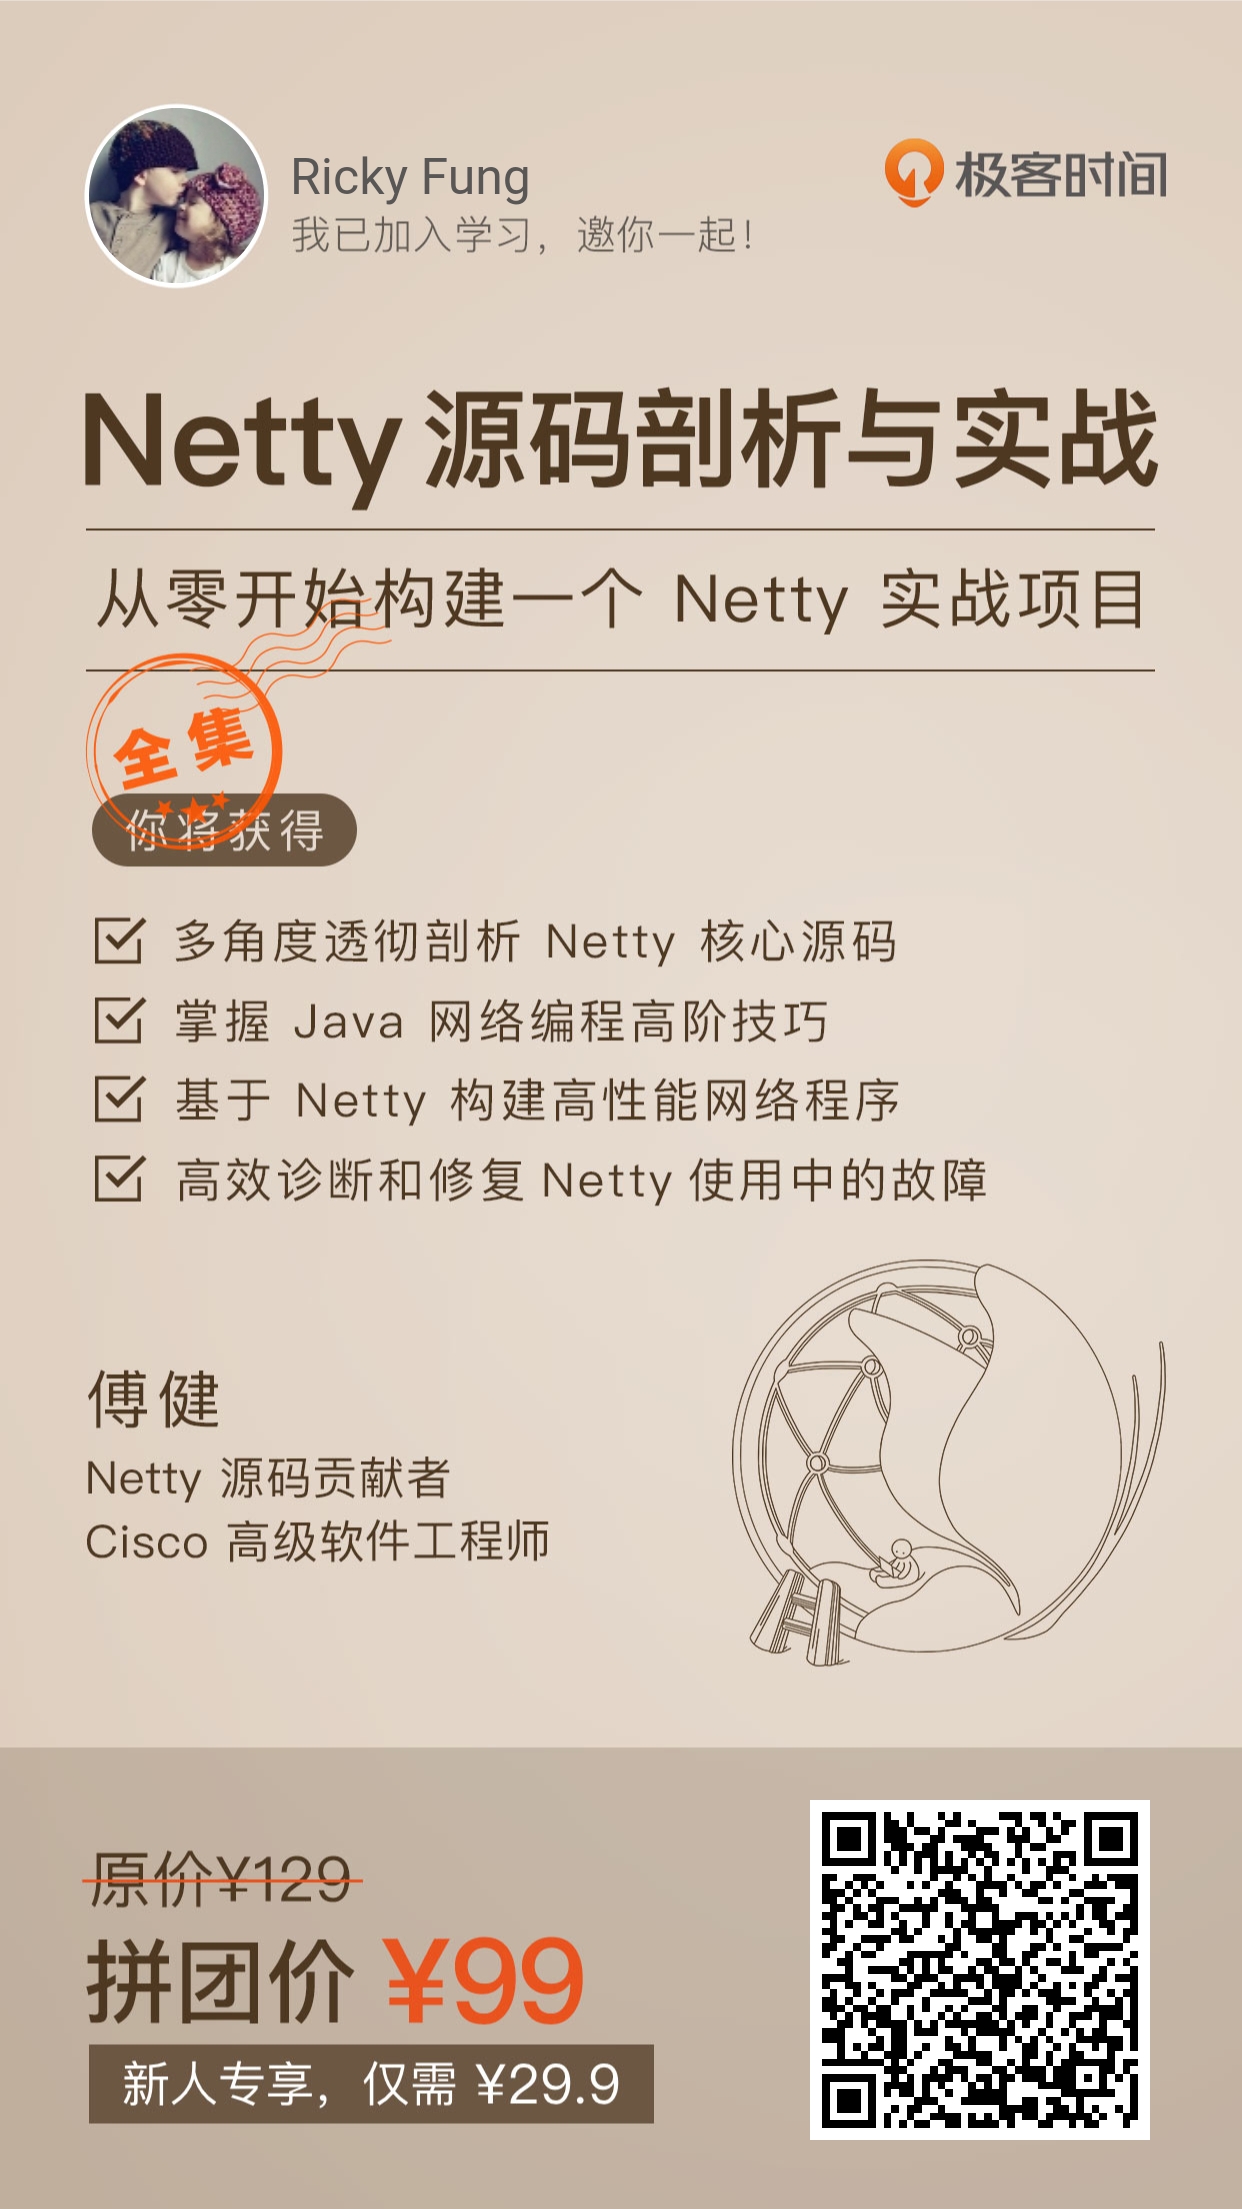 netty_in_action